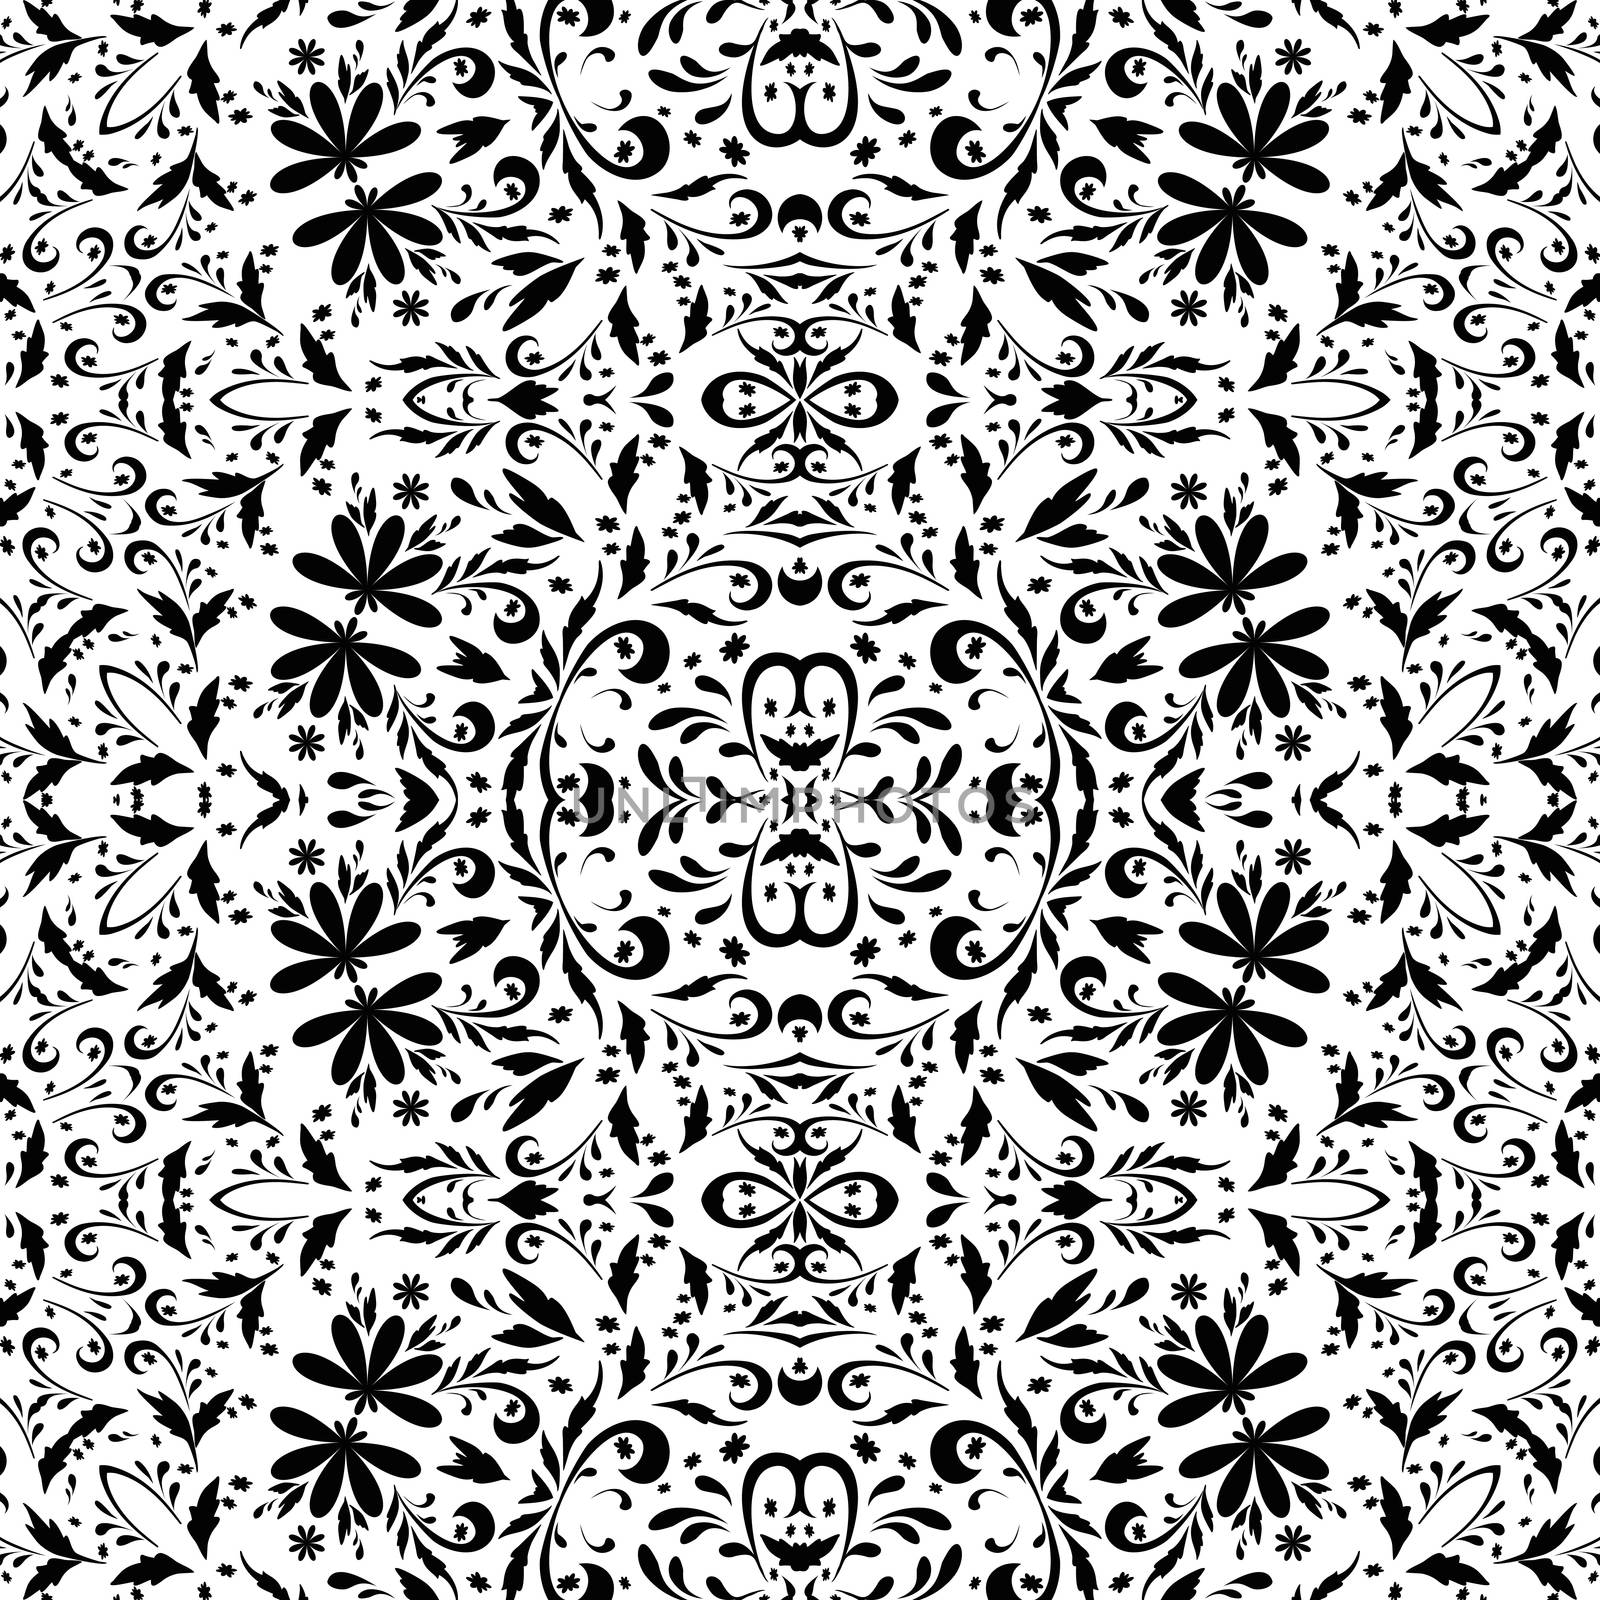 Seamless outline floral pattern by alexcoolok